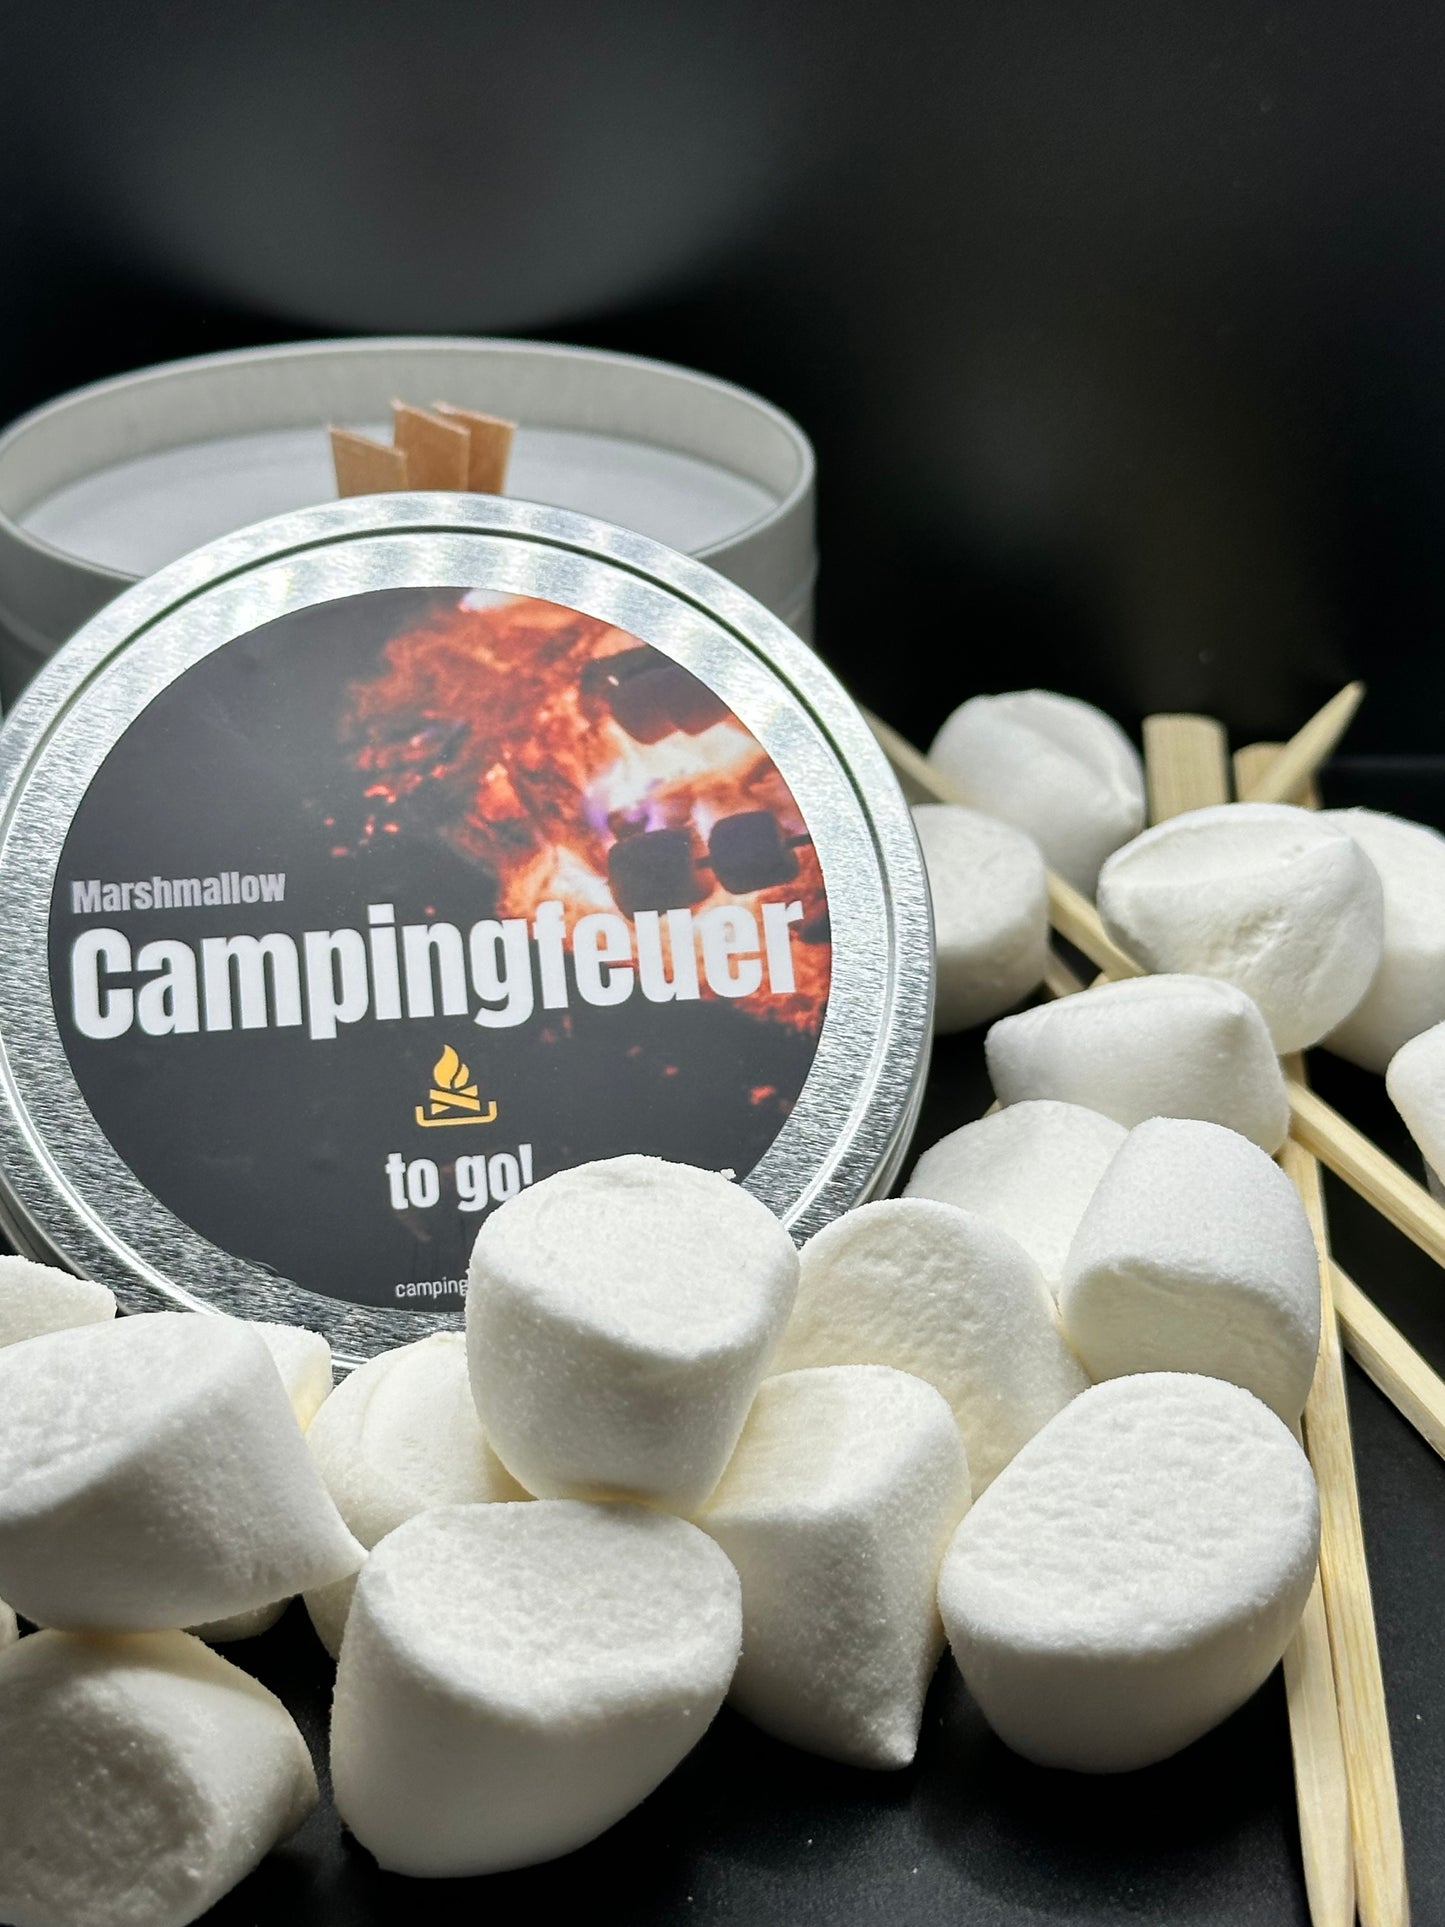 Campingfeuer-Marshmallow-Party to go! * Komplettset * CAMPERHIT!